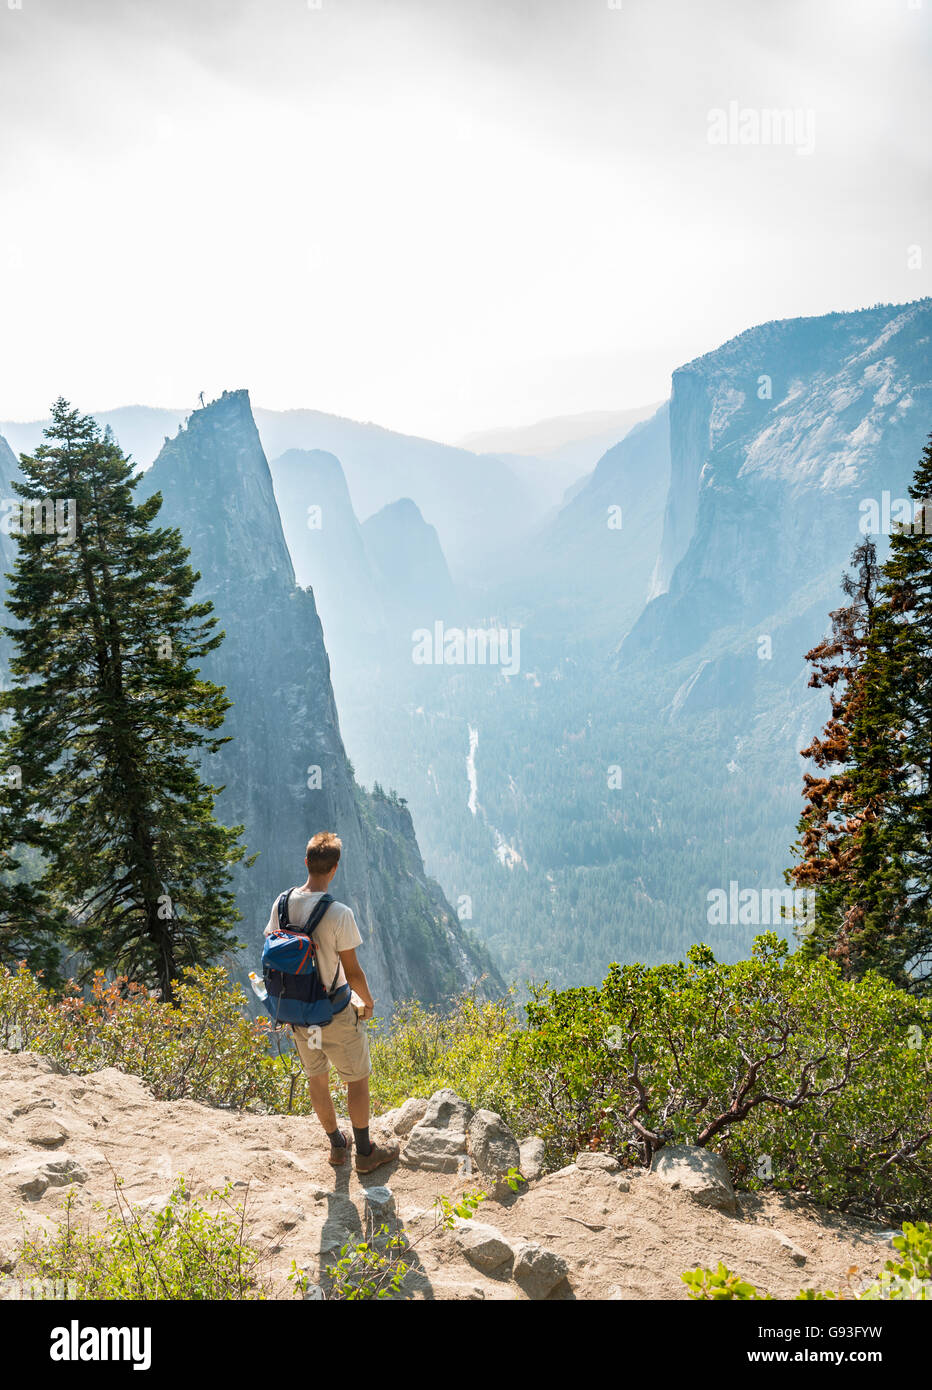 Young man on hiking trail, view of Yosemite Valley, Four Mile Trail, Taft Point, El Capitan, Yosemite National Park, California Stock Photo